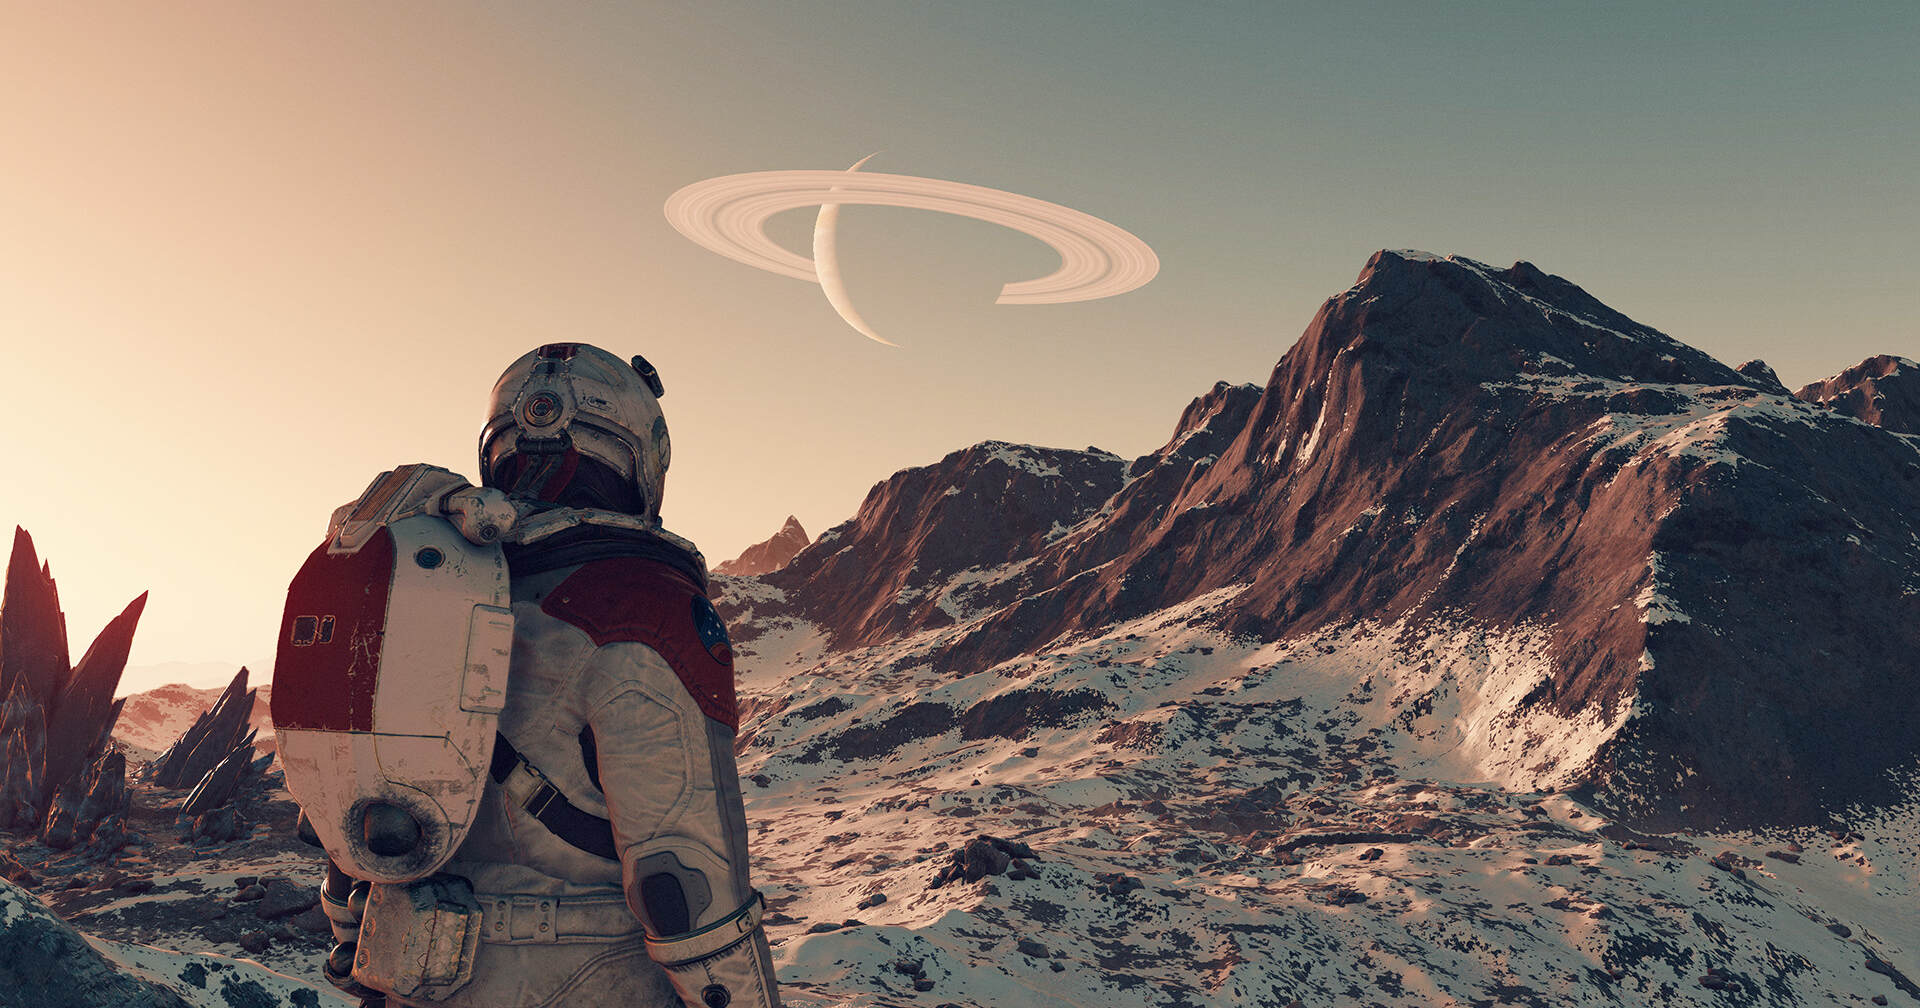 We see the player as astronaut looking at a snow-covered mountain range in third-person as the sun sets in Starfield.